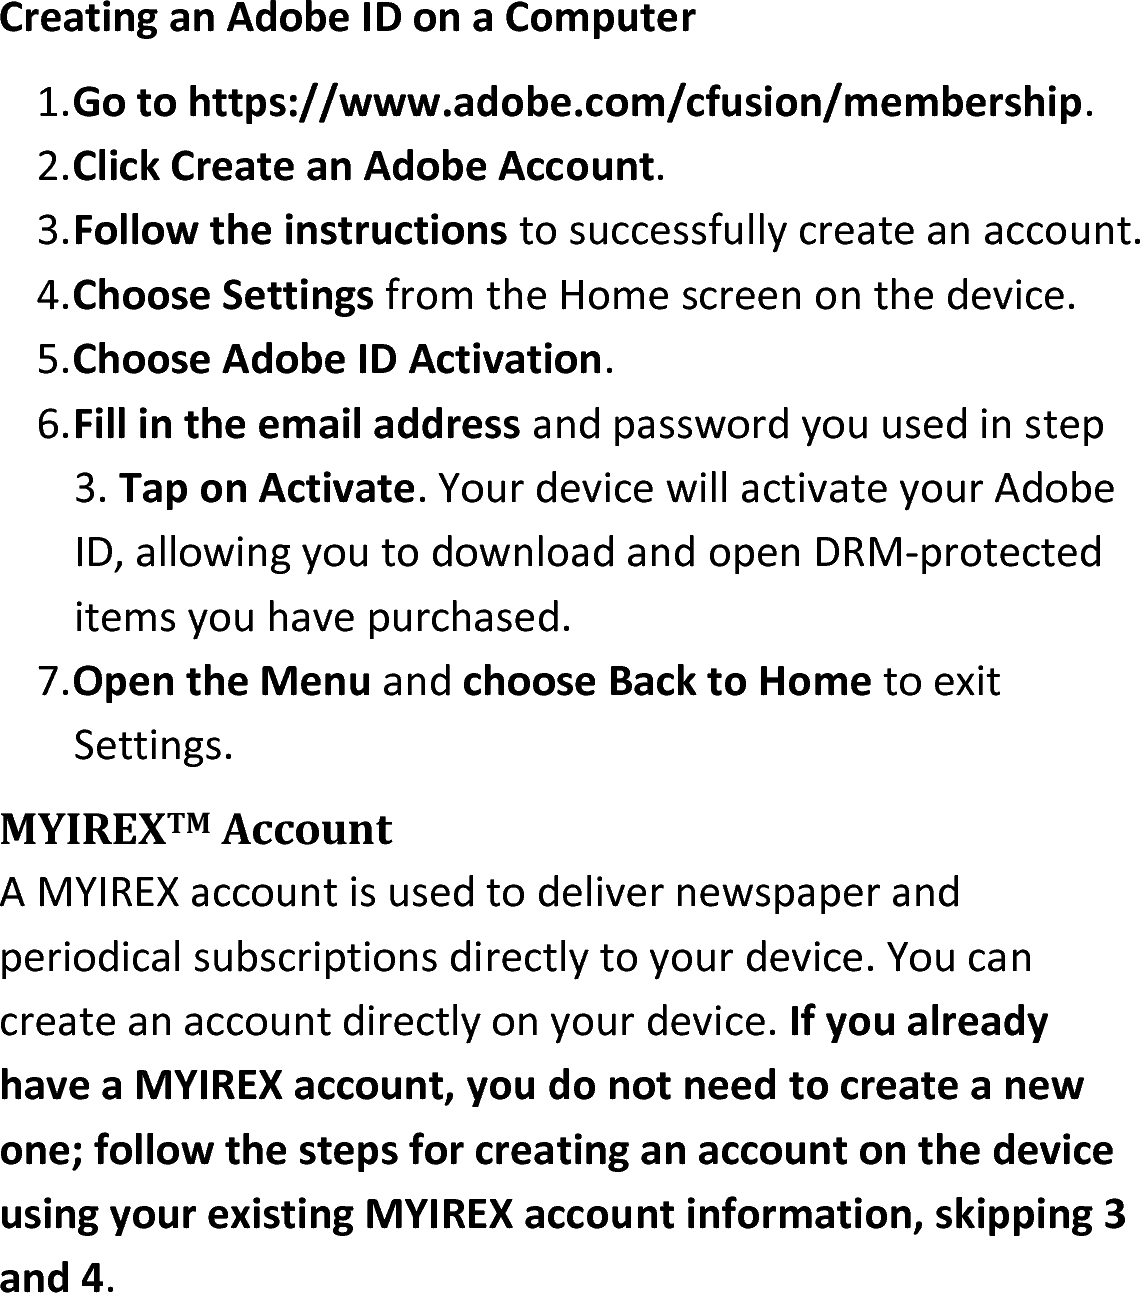 Creating an Adobe ID on a Computer1.Go to https://www.adobe.com/cfusion/membership.2.Click Create an Adobe Account.3.Follow the instructions to successfully create an account.4.Choose Settings from the Home screen on the device.5.Choose Adobe ID Activation.6.Fill in the email address and password you used in step 3. Tap on Activate. Your device will activate your Adobe ID, allowing you to download and open DRM-protected items you have purchased.7.Open the Menu and choose Back to Home to exit Settings.MYIREXTM AccountA MYIREX account is used to deliver newspaper and periodical subscriptions directly to your device. You can create an account directly on your device. If you already have a MYIREX account, you do not need to create a new one; follow the steps for creating an account on the device using your existing MYIREX account information, skipping 3 and 4. 